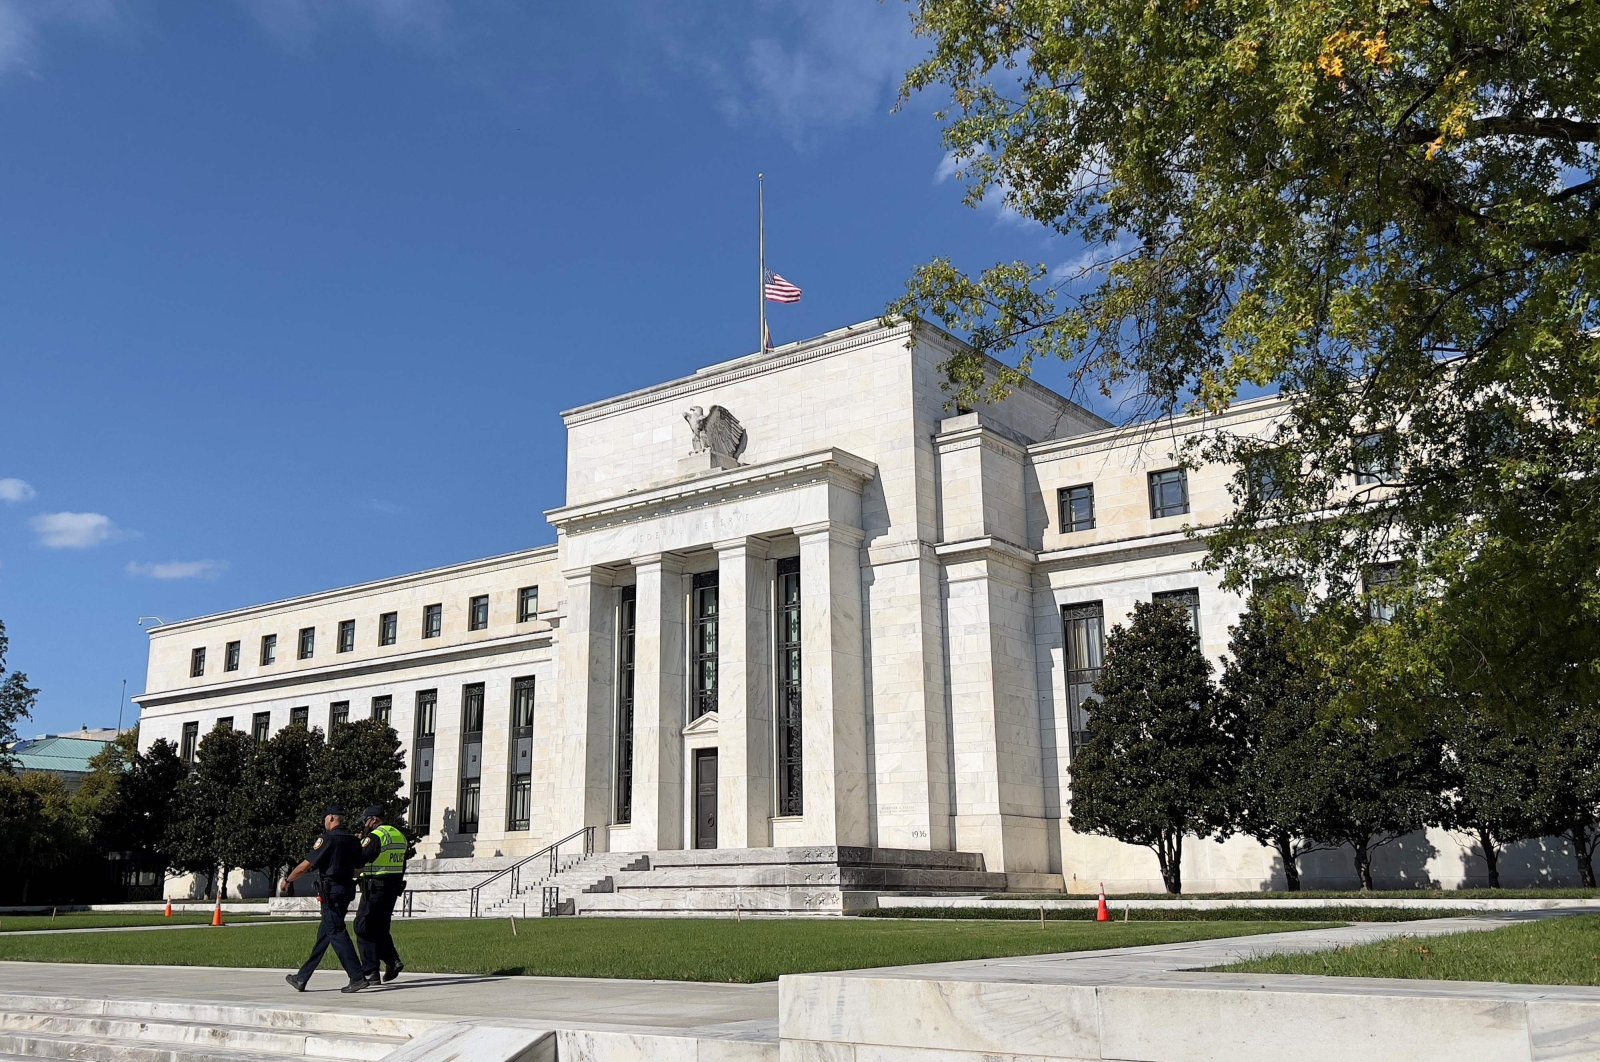 The U.S. Federal Reserve building in Washington, D.C., U.S., Oct. 22, 2021. (AFP Photo)